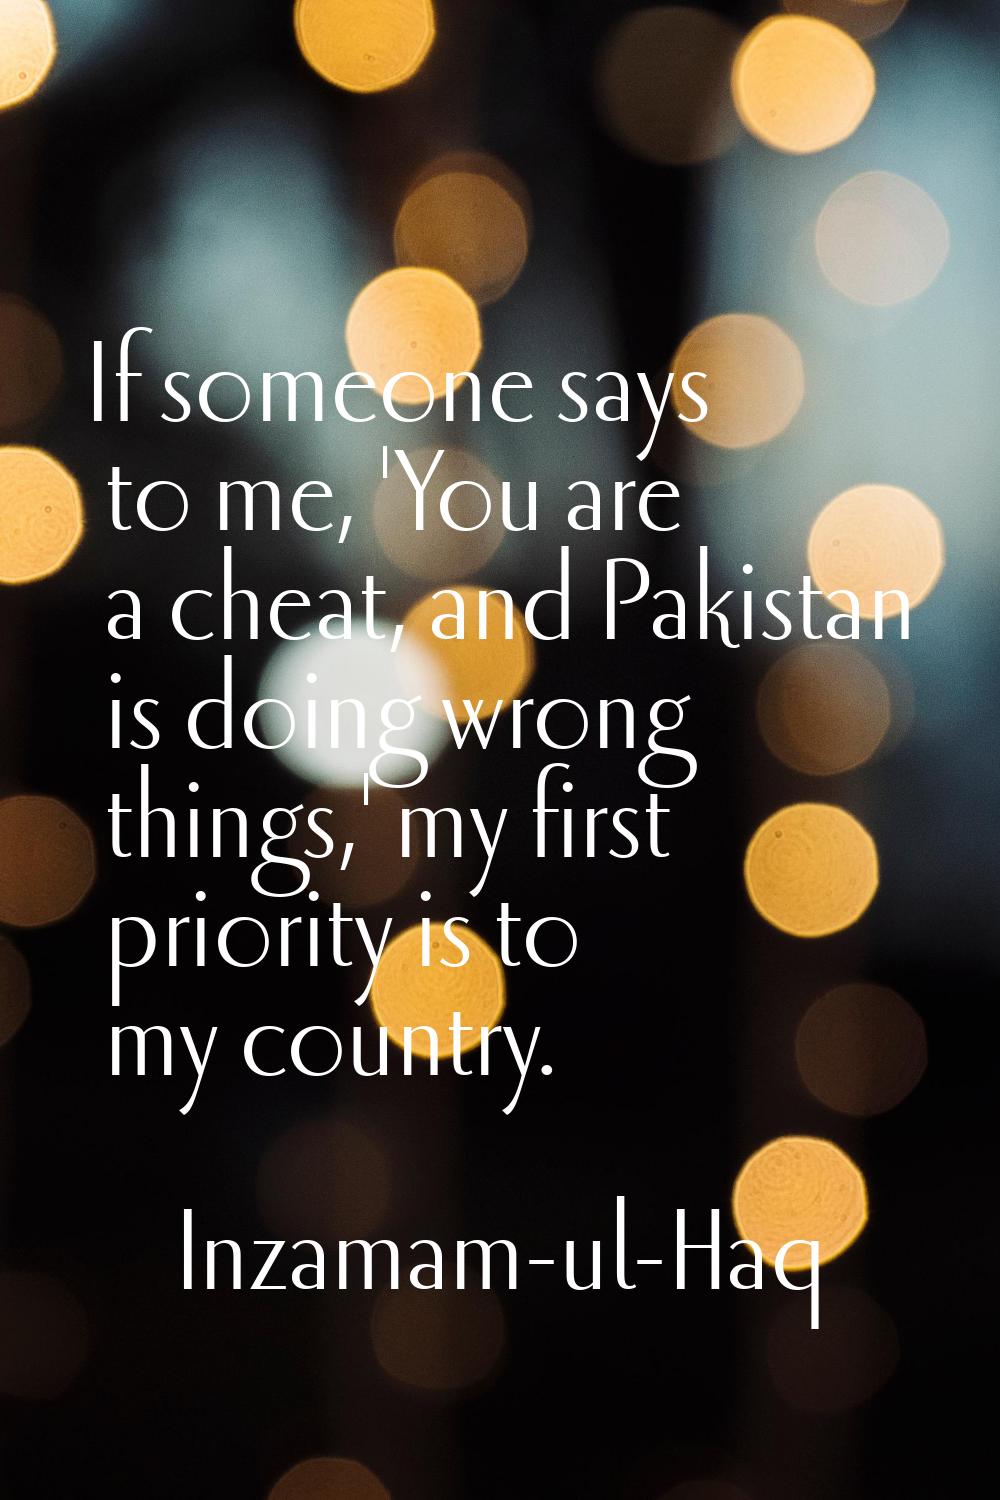 If someone says to me, 'You are a cheat, and Pakistan is doing wrong things,' my first priority is 